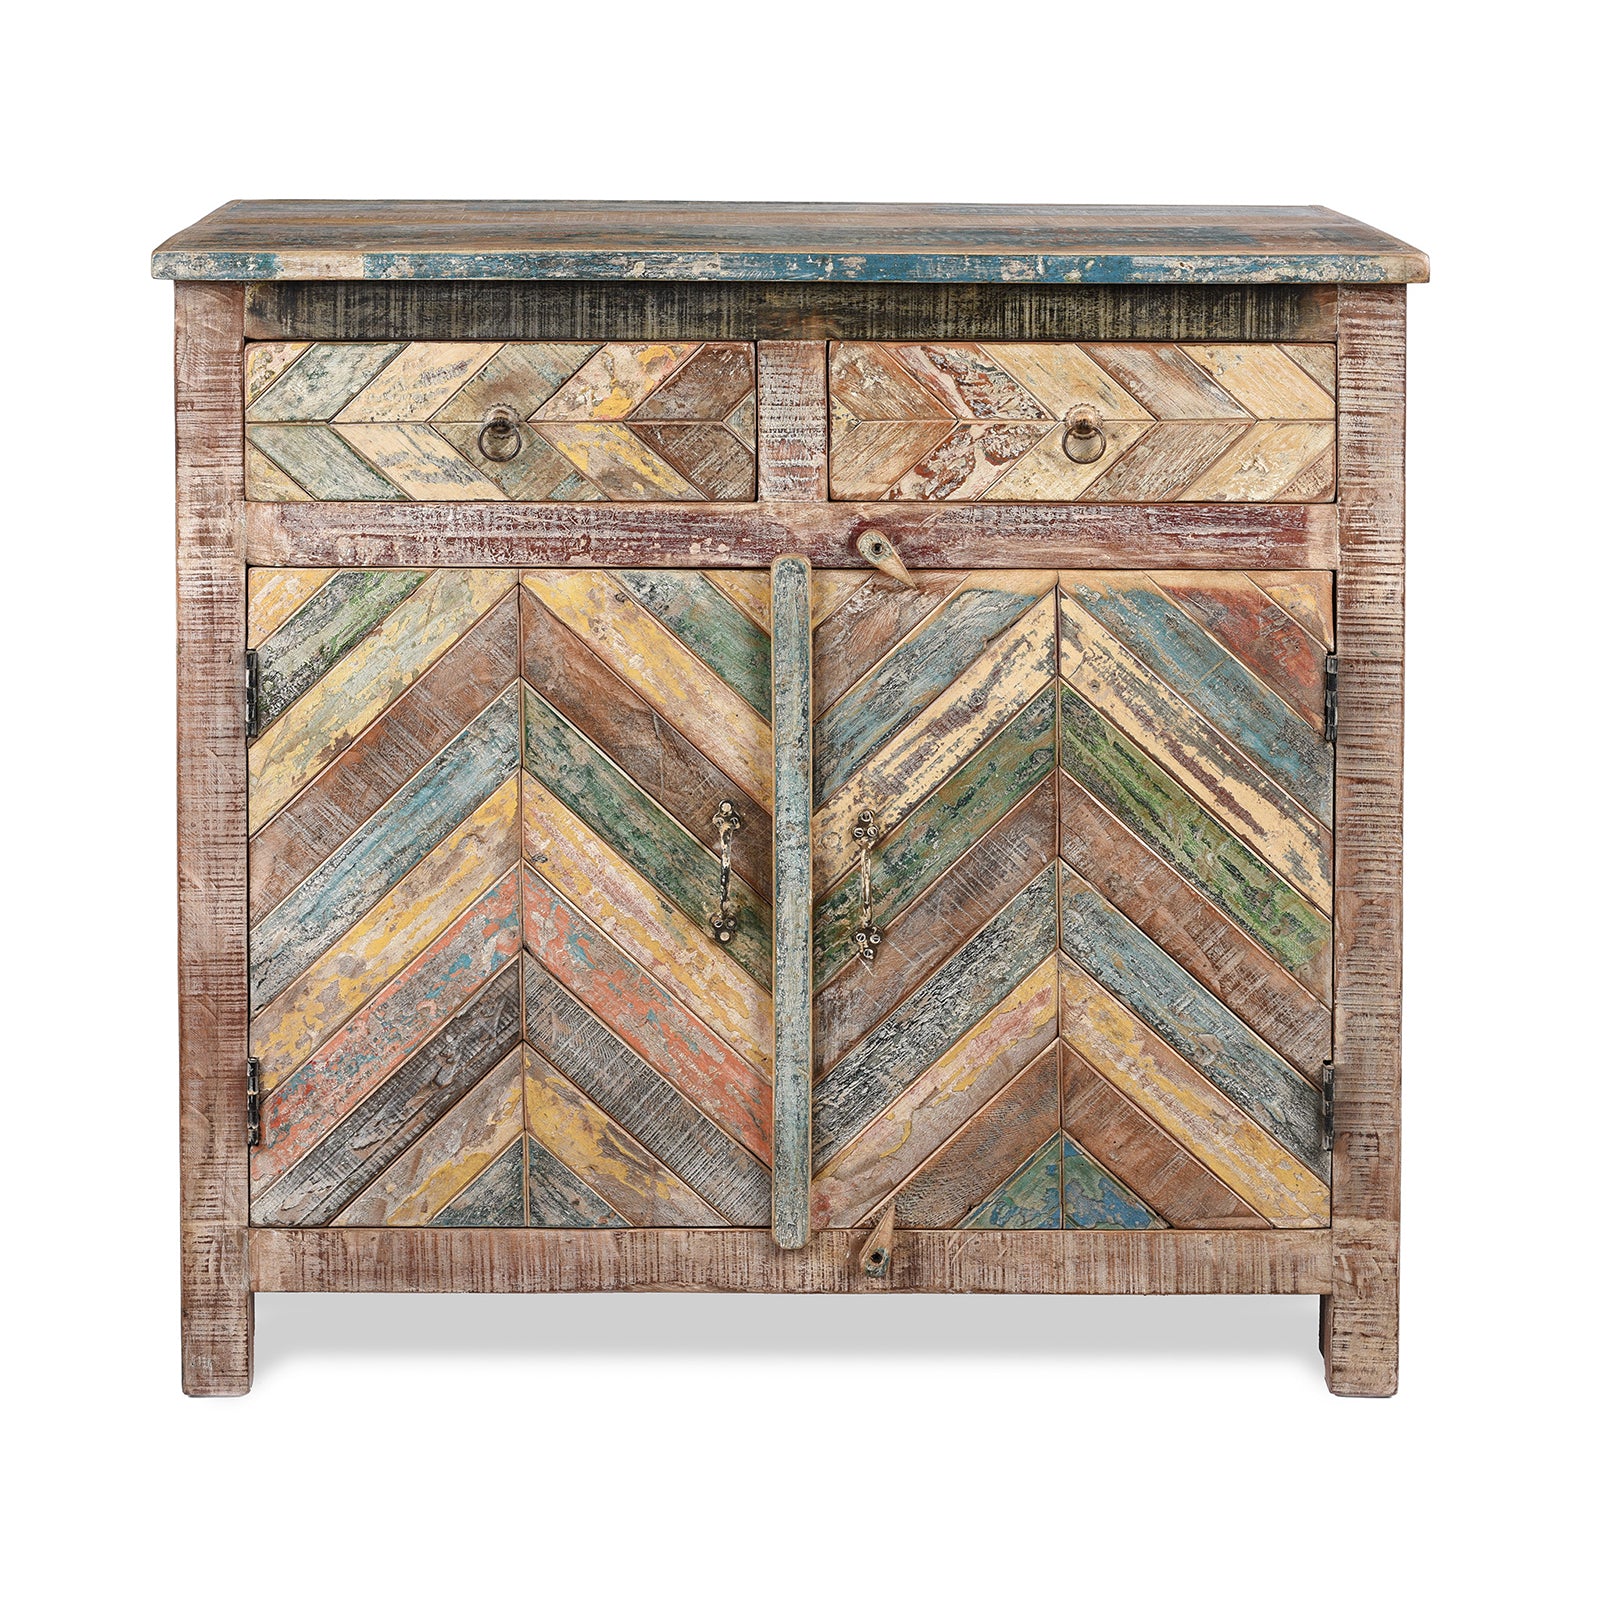 Reclaimed Teak Parquet Side Cabinet With Painted Finish | Indigo Antiques